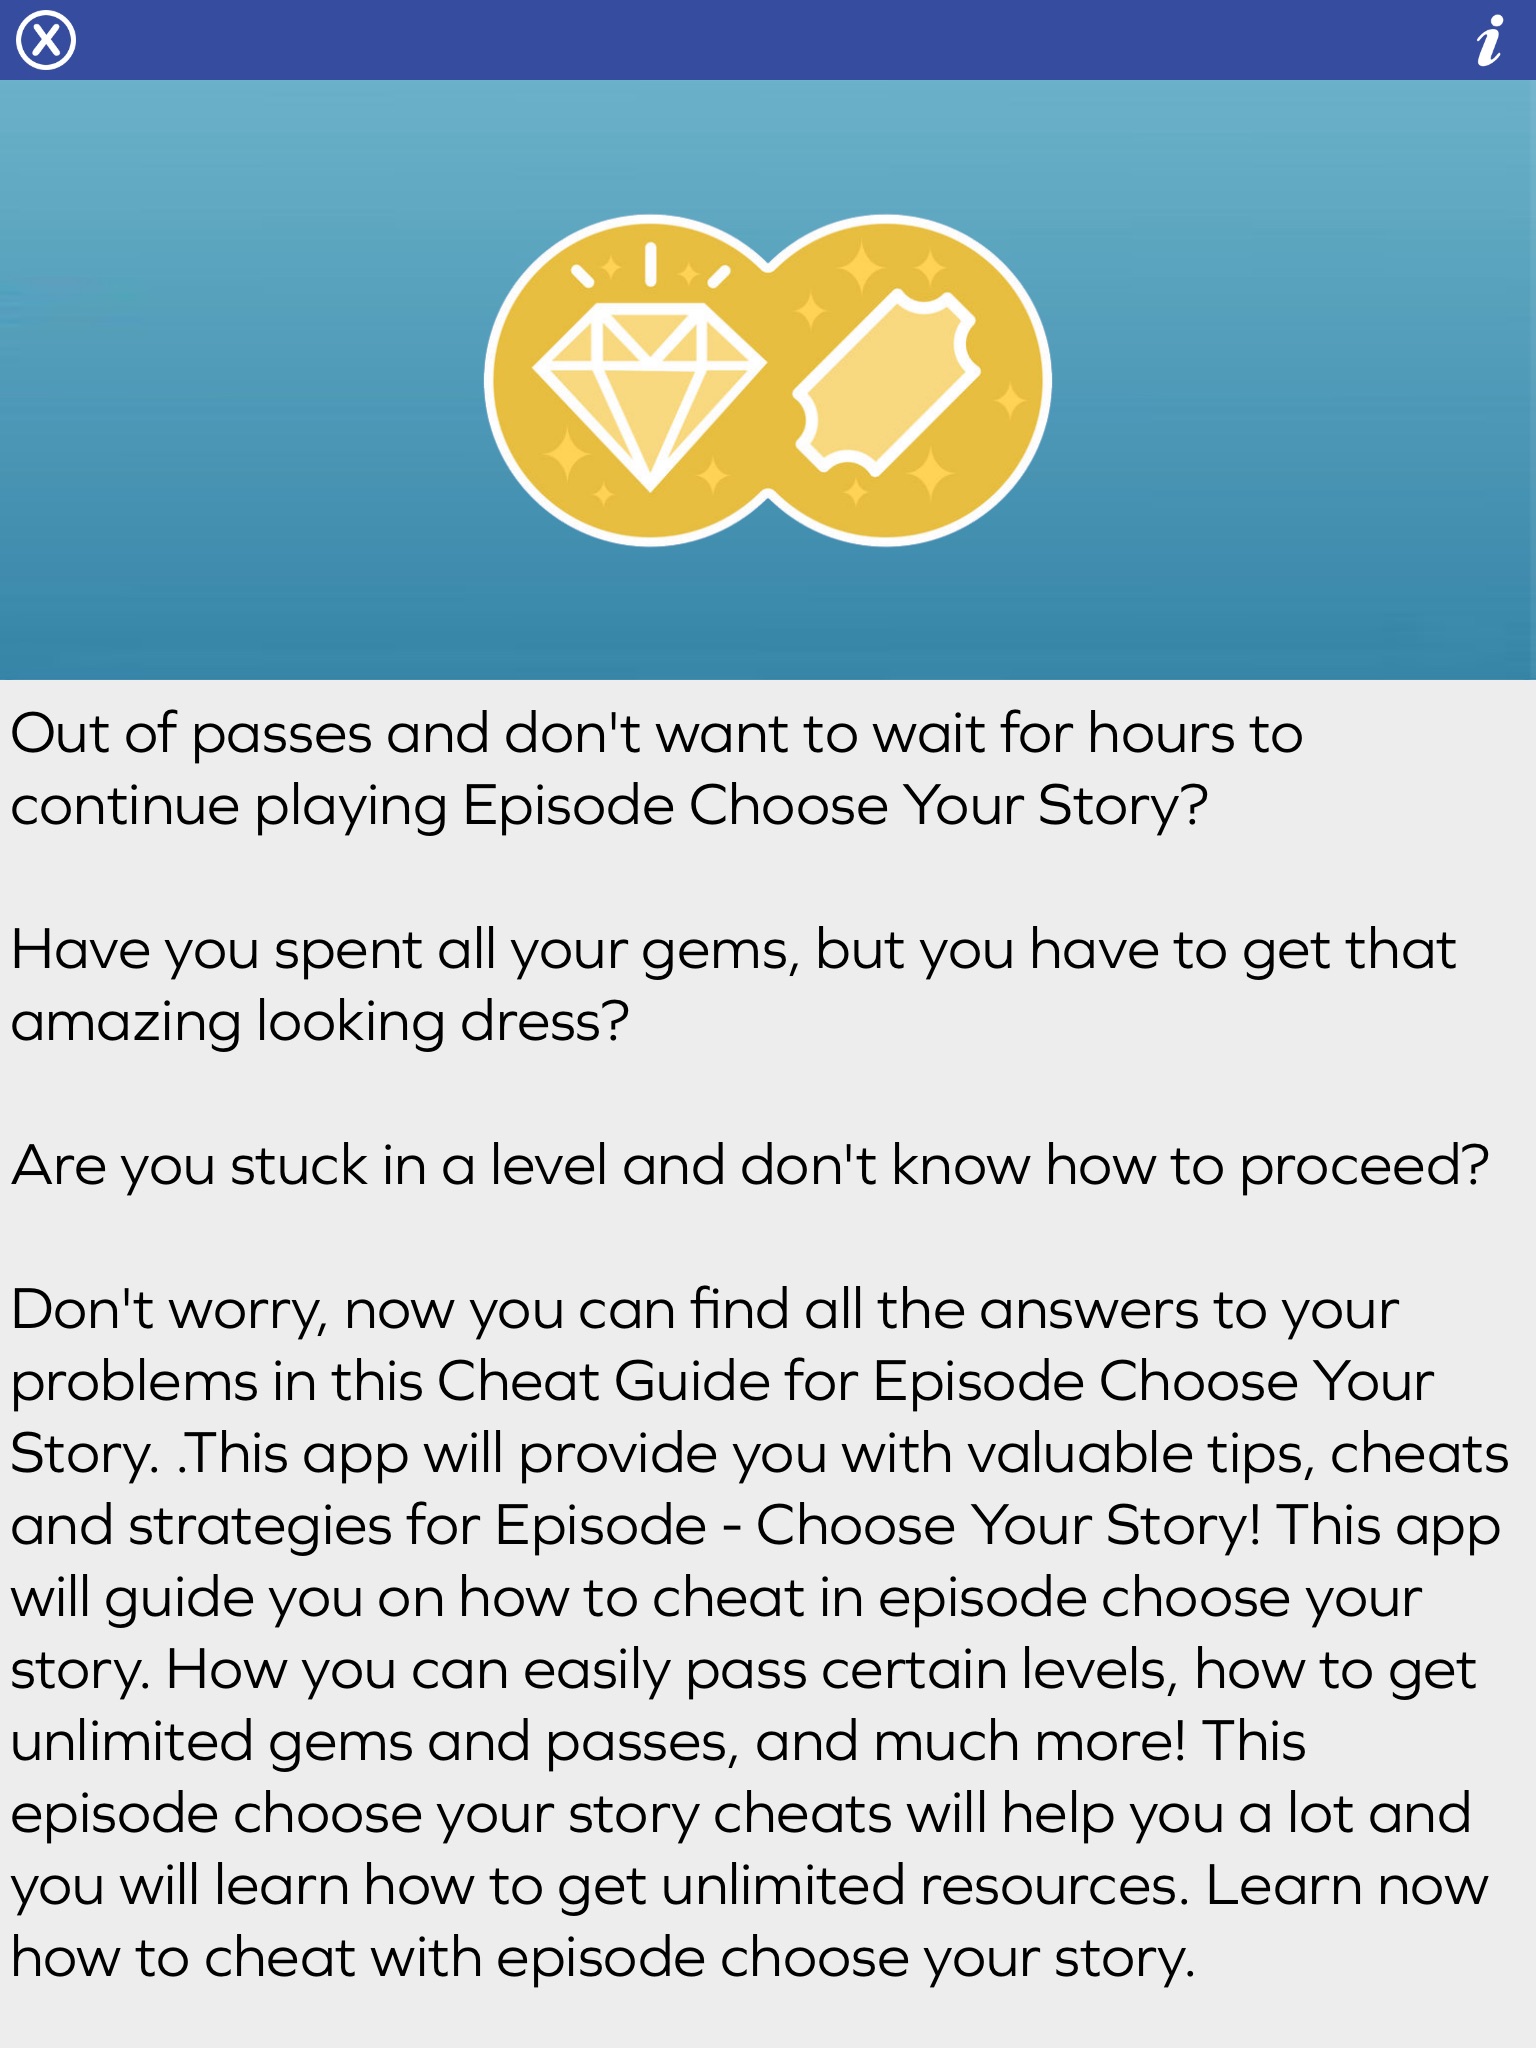 Passes & Gems Cheats for Episode Choose Your Story screenshot 2